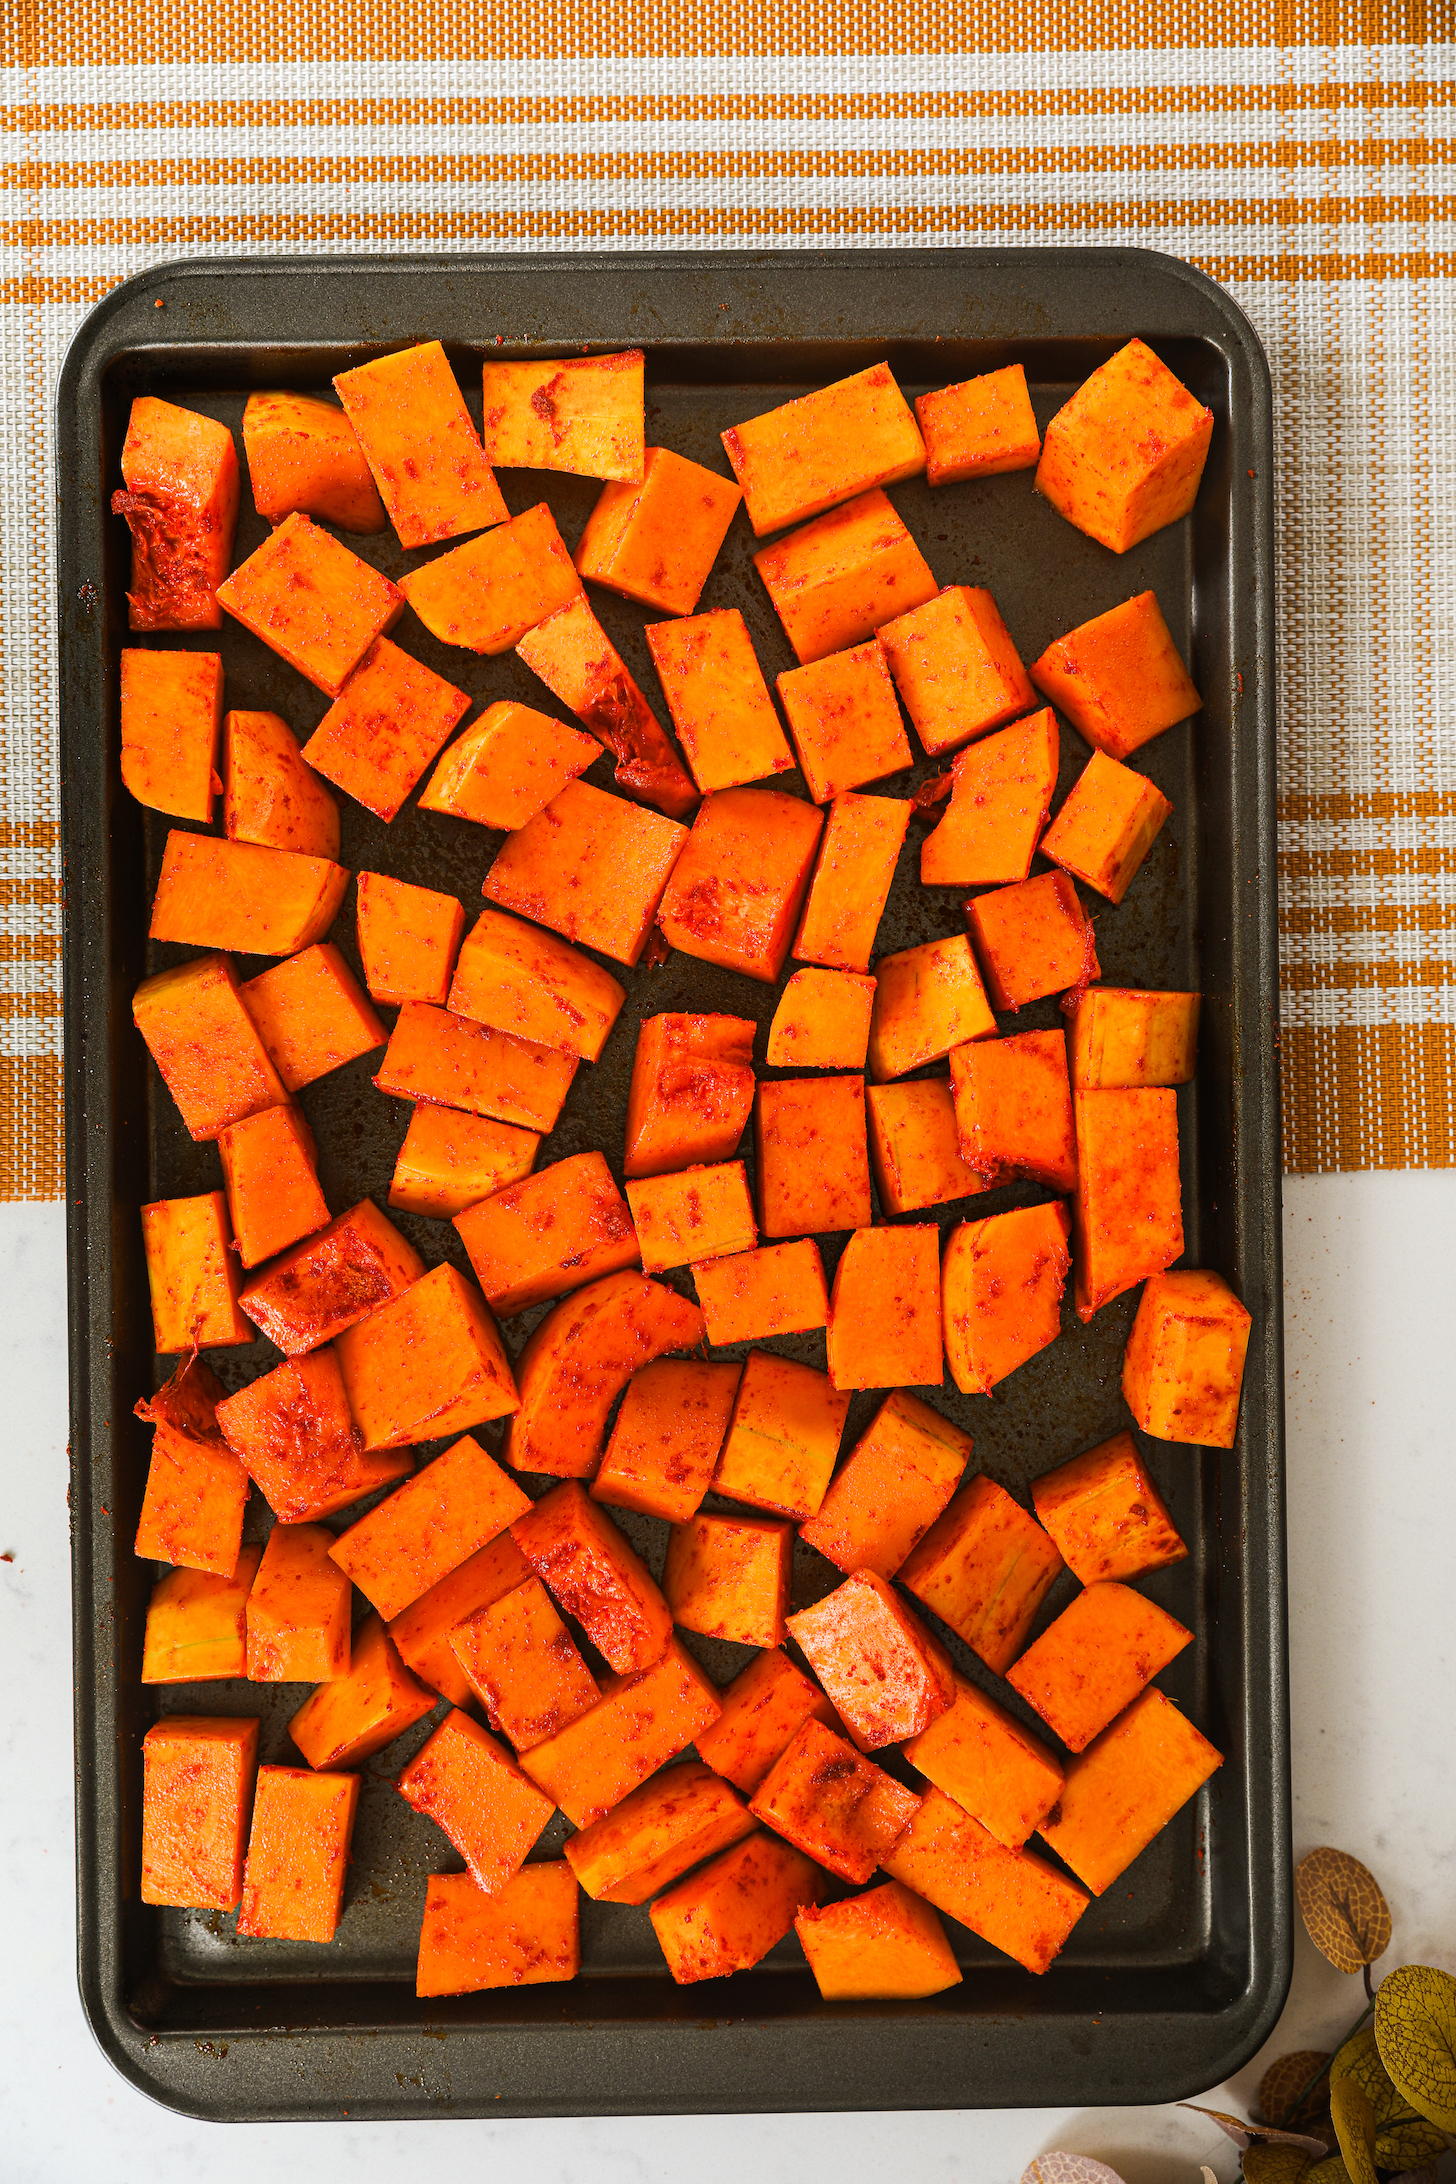 Butternut squash chunks neatly lined up in a single row on an oven tray.